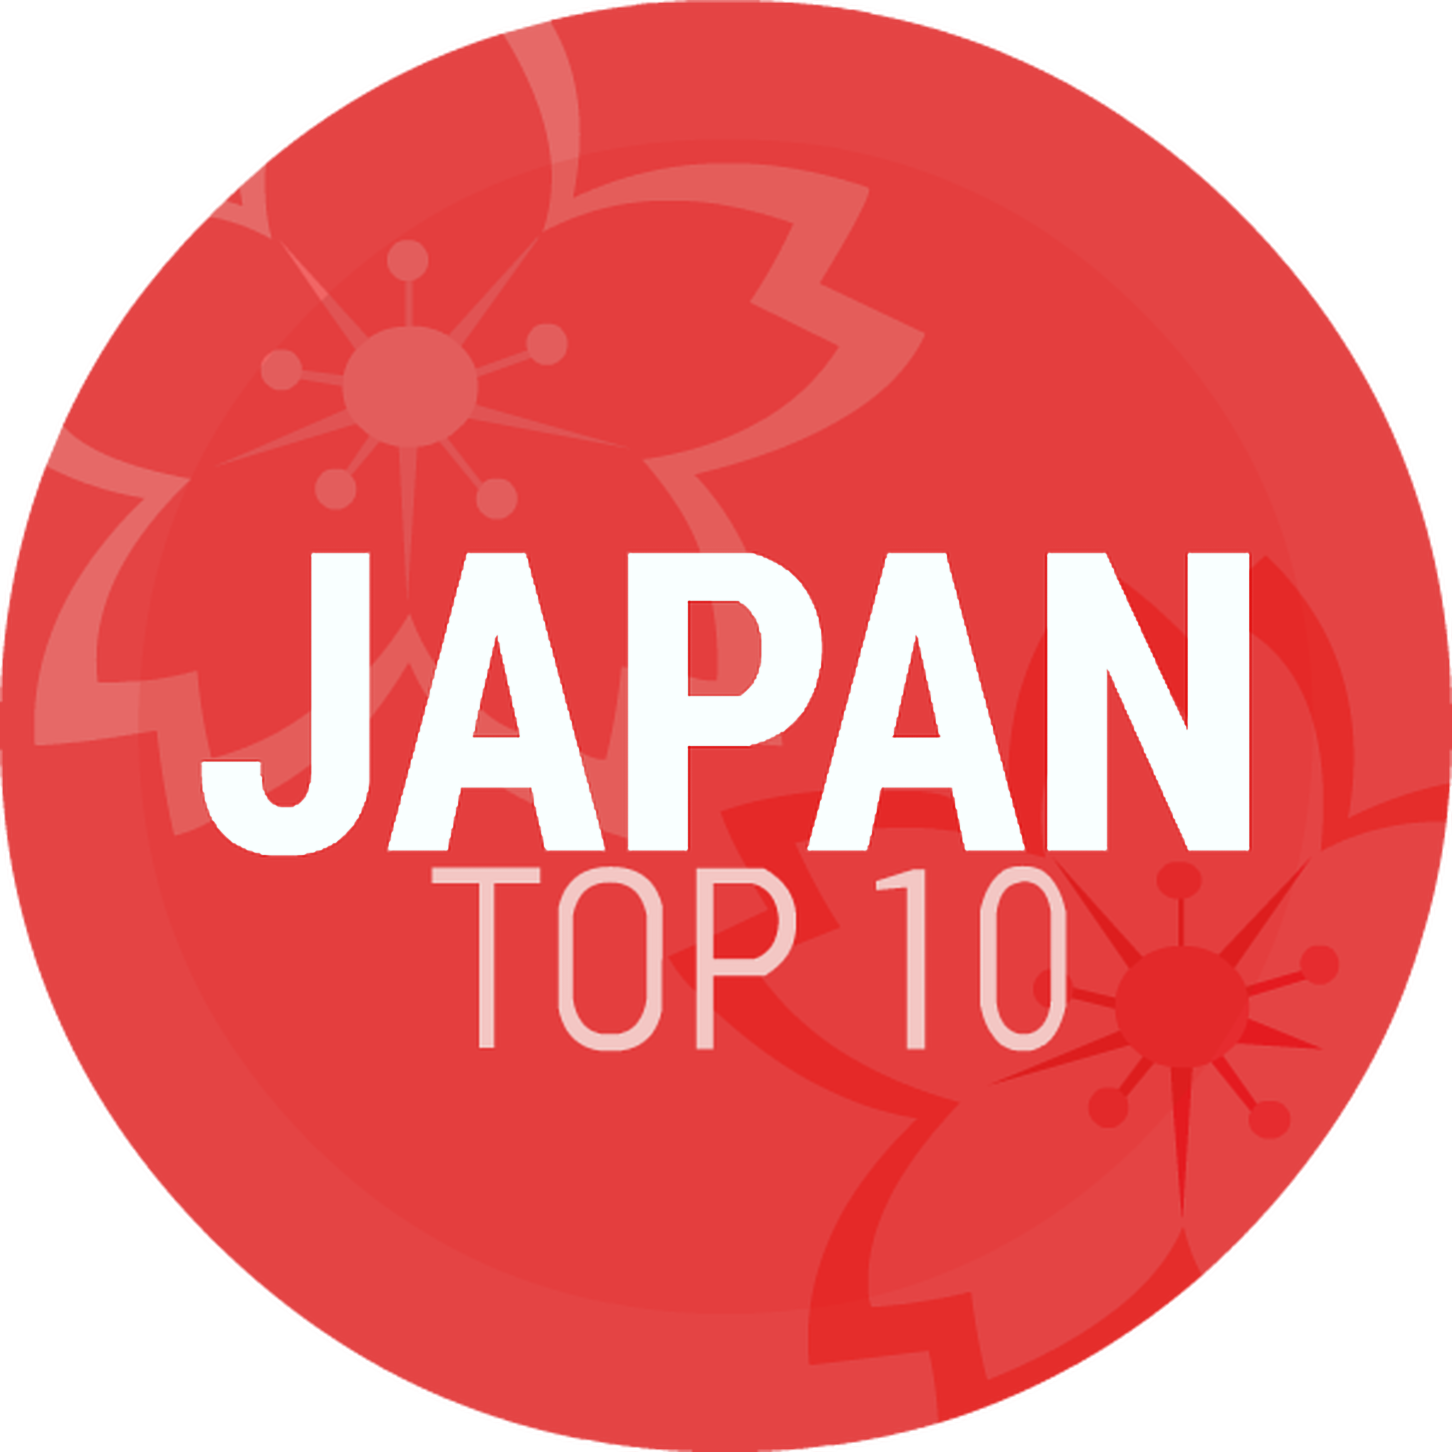 Episode 269: Japan Top 10 February 2019 Special: Kayo Kyoku Plus Collaboration